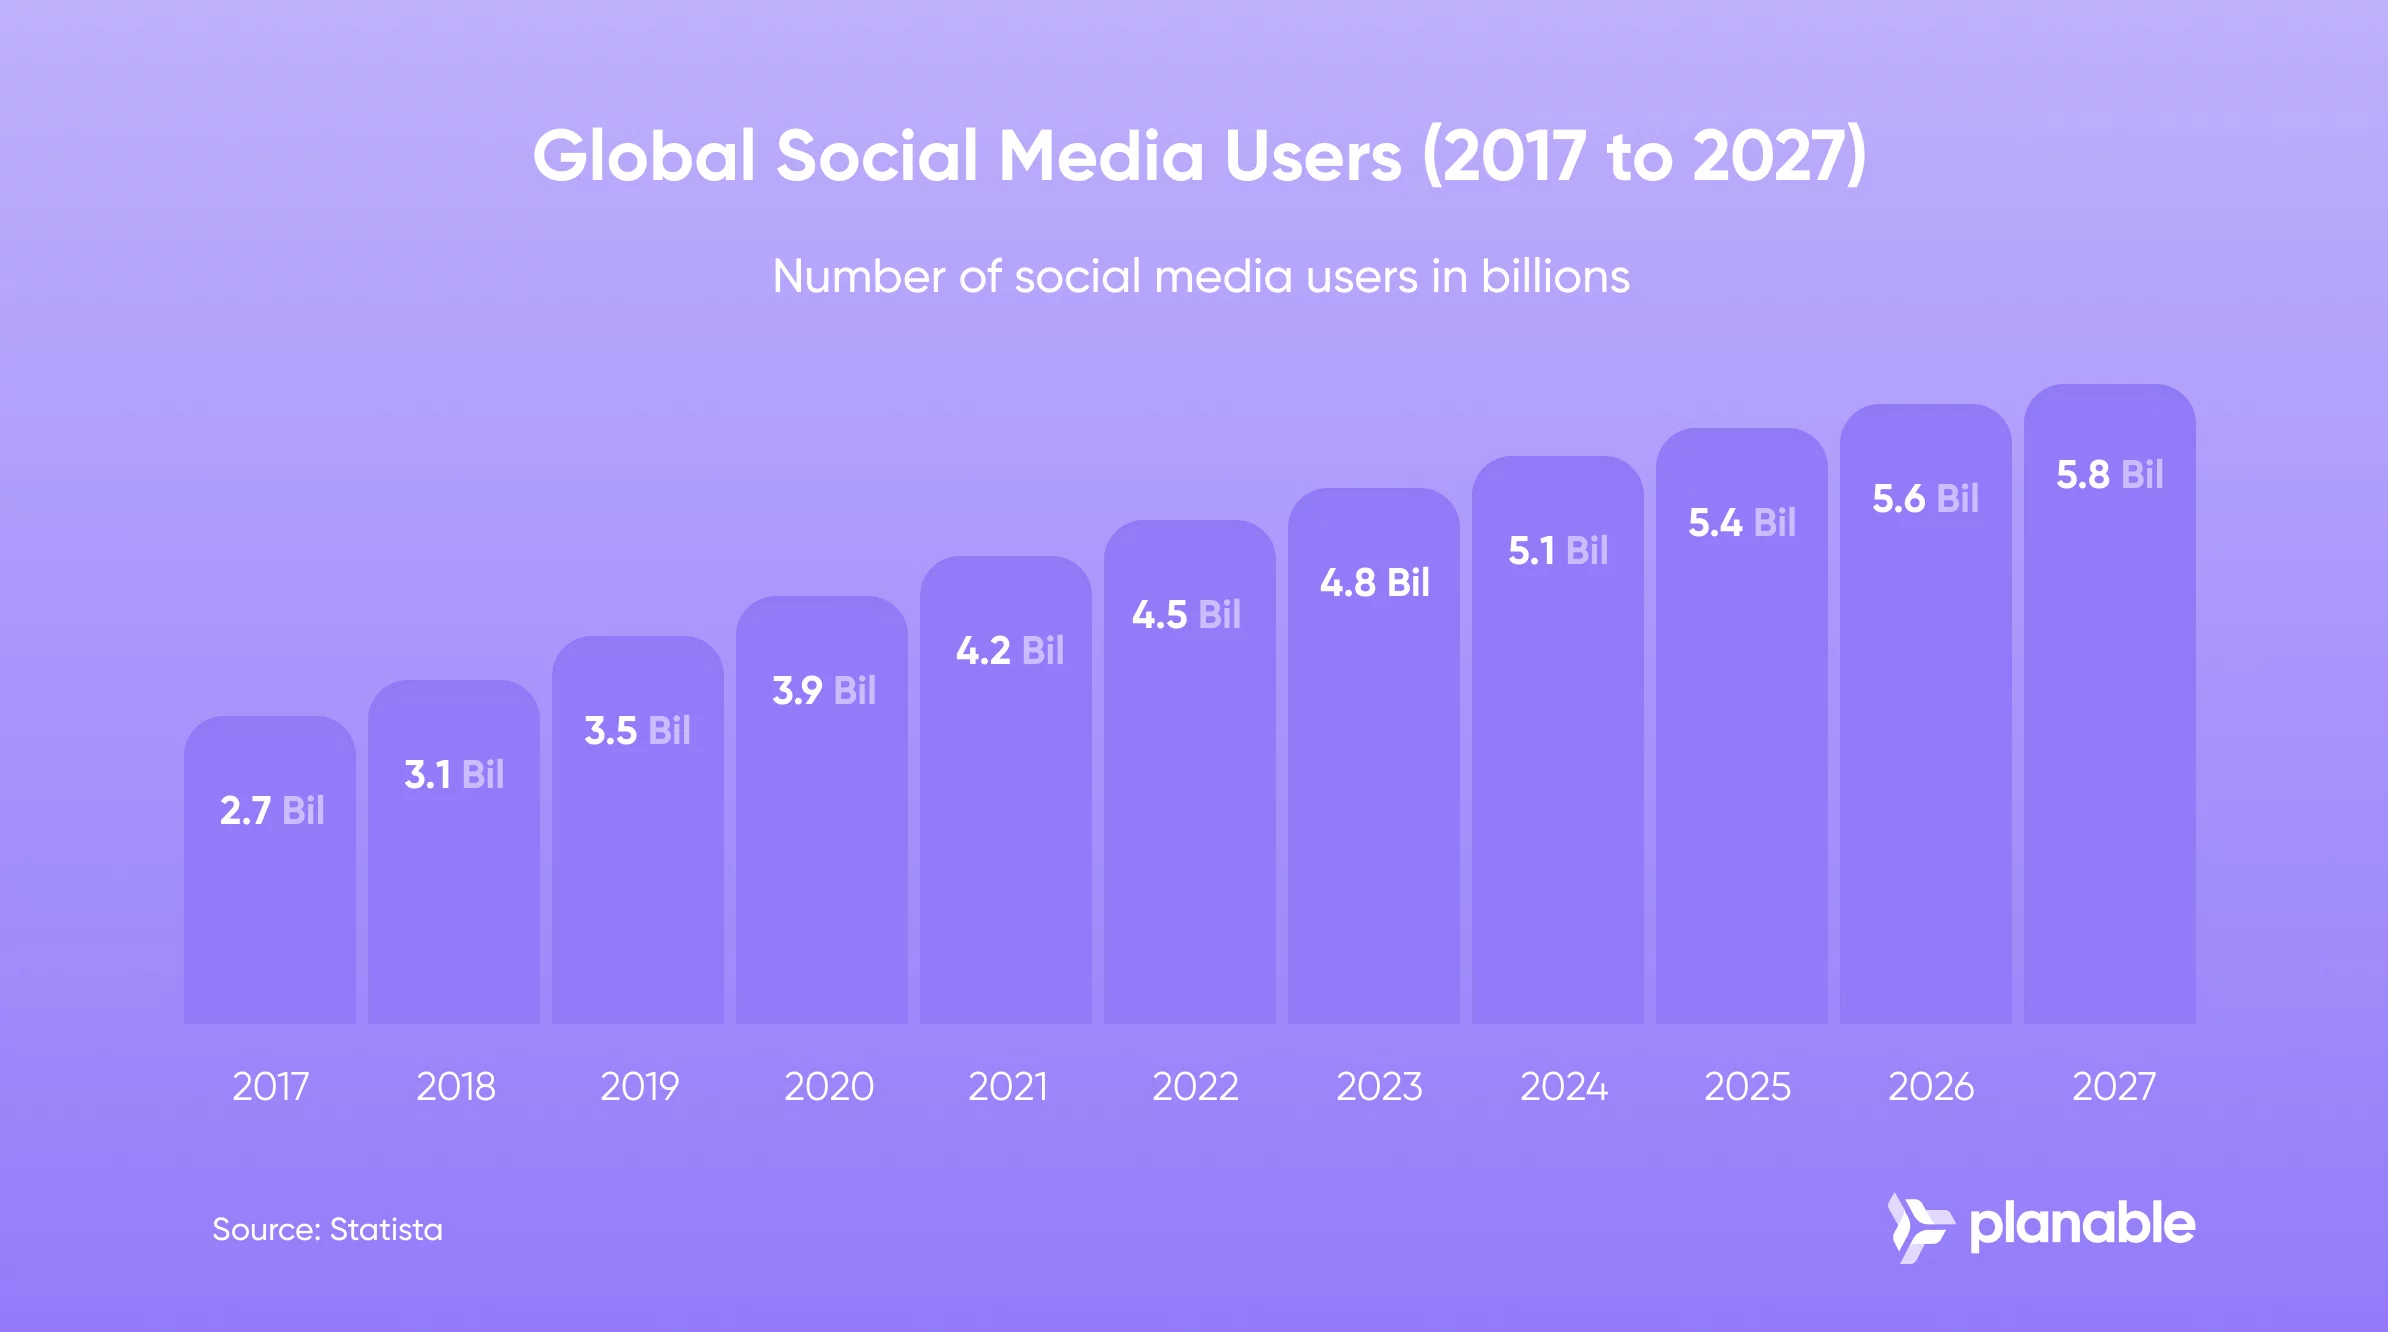 chart showing number of social media users will reach 5.8B in 2027 